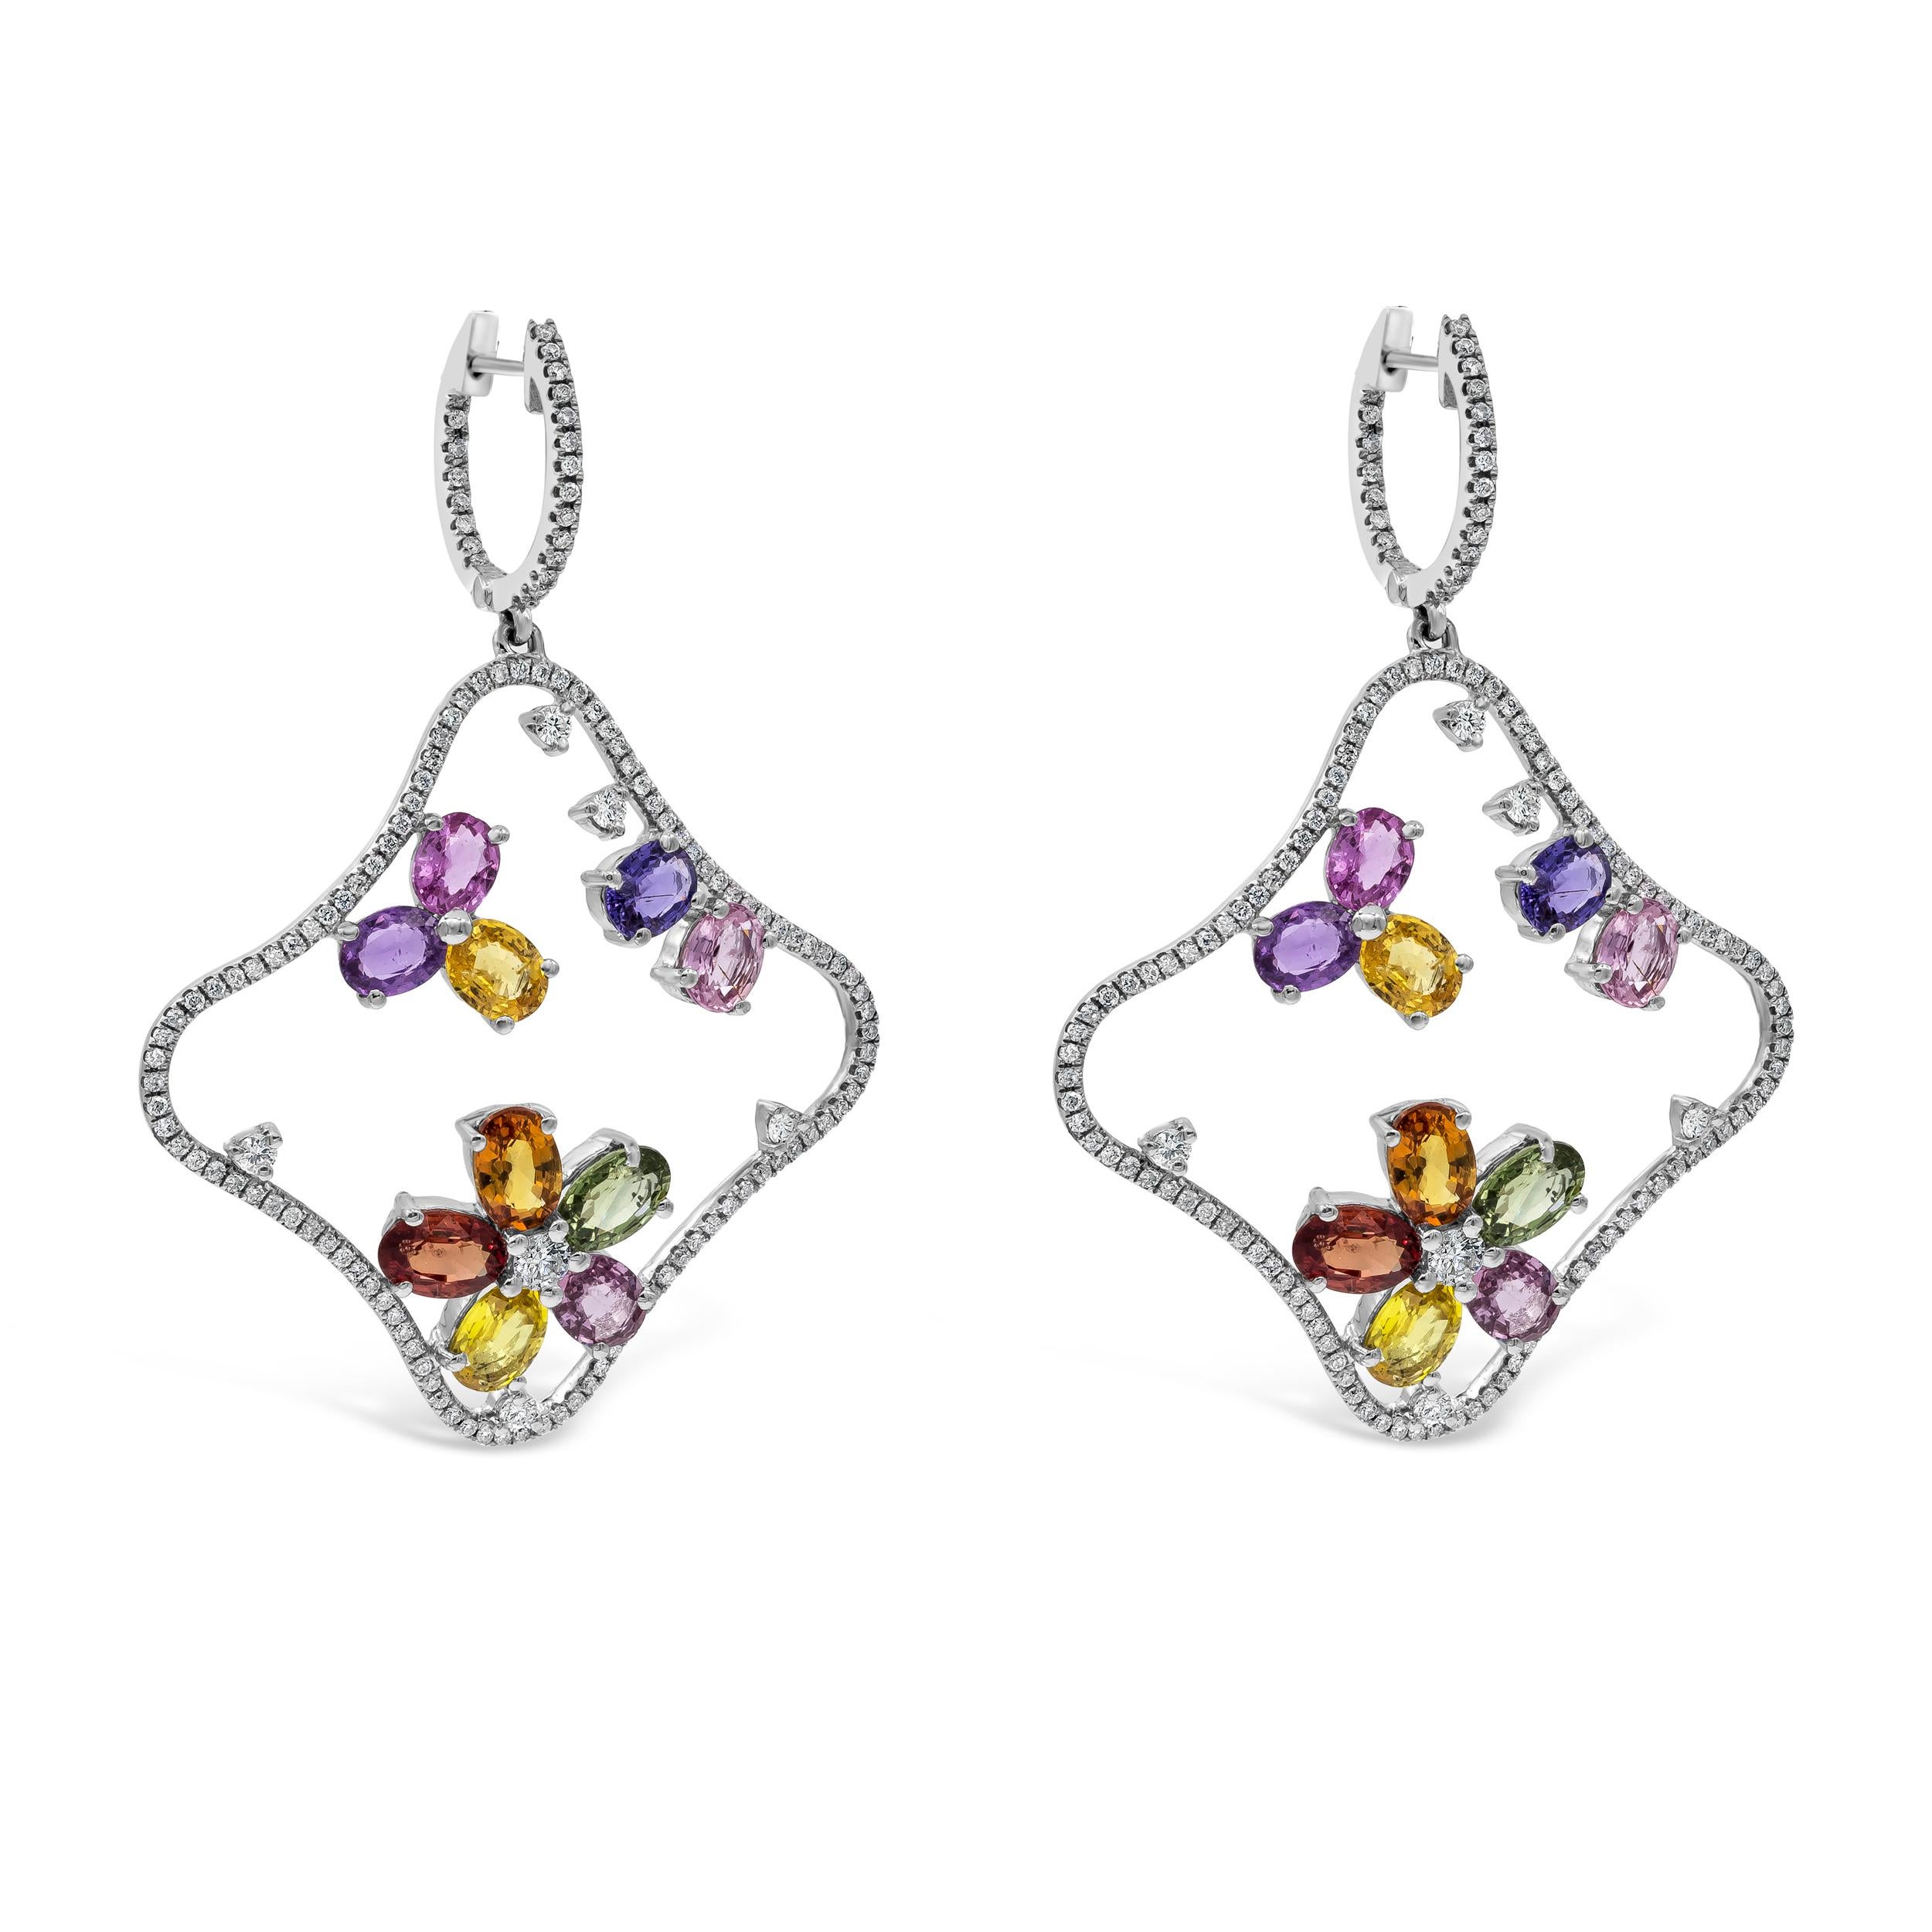 Features a fashion floral-motif dangle earrings showcasing 9.67 carats total oval cut multi-color sapphires. In an Open-work design, accented with melee round diamonds weighing 1.18 carats total. Made with 18K White Gold. 

Roman Malakov is a custom